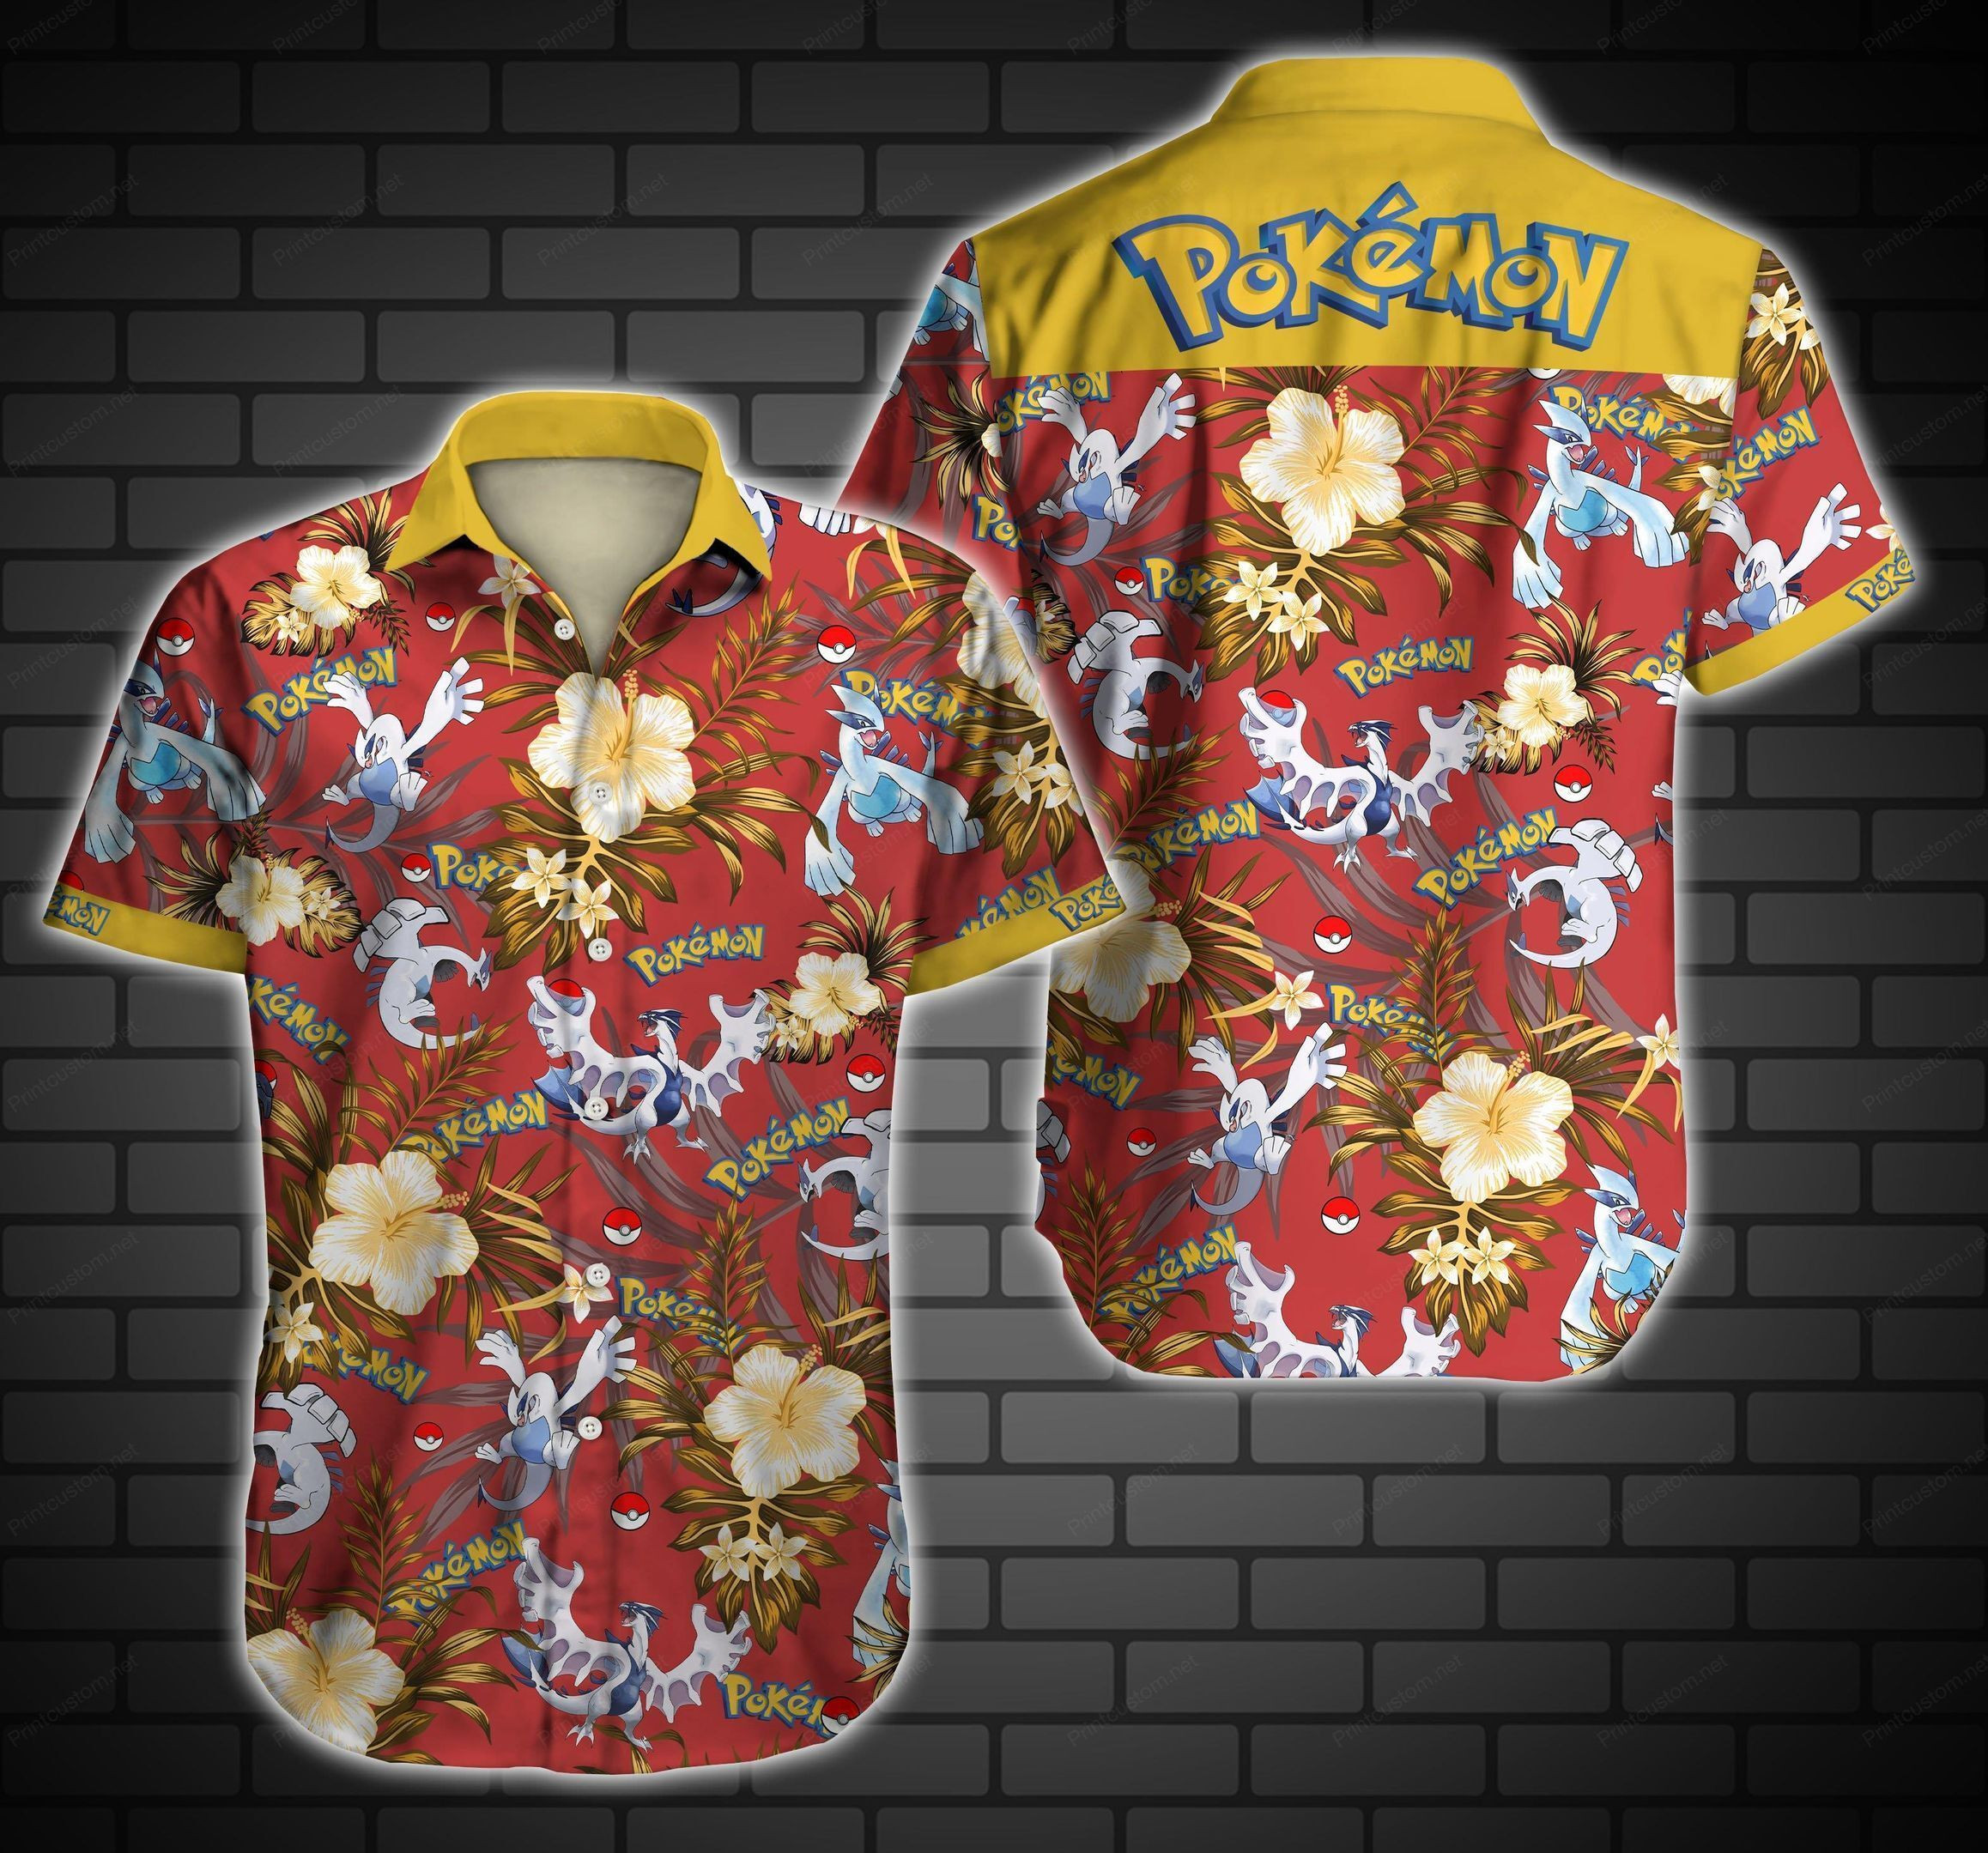 Choose from the many styles and colors to find your favorite Hawaiian Shirt below 16